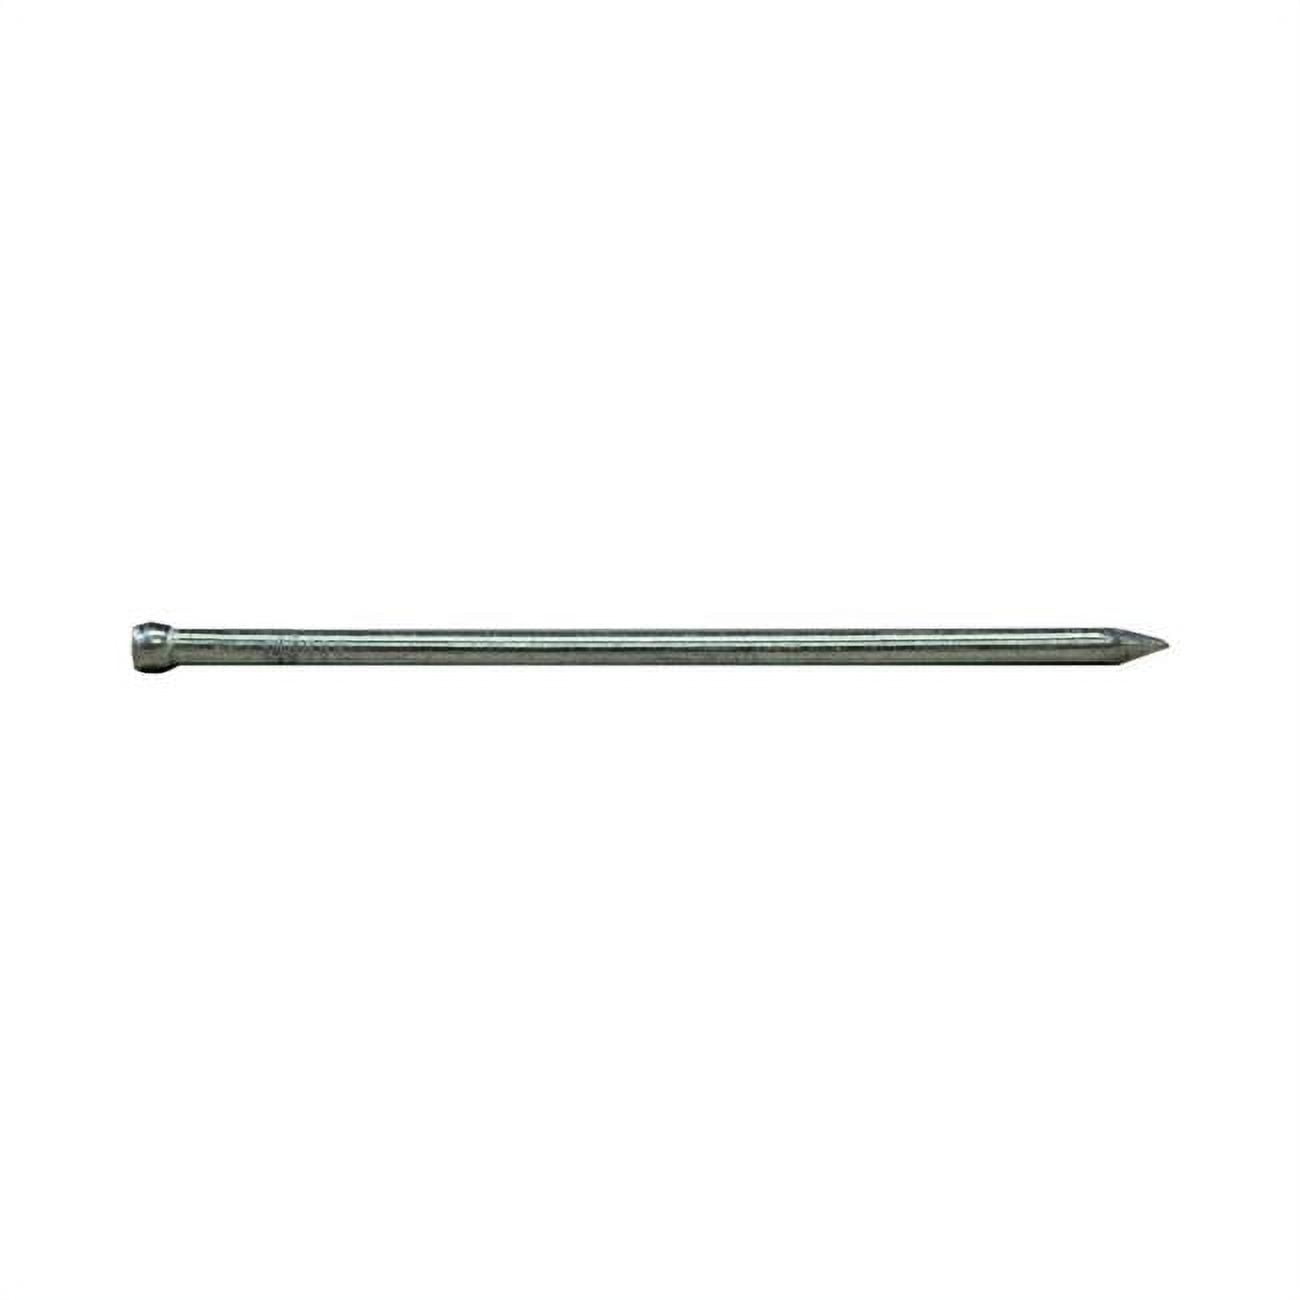 UPC 042928006351 product image for 5692173 2 in. 6D 1 lbs Hedge Finish Nail | upcitemdb.com